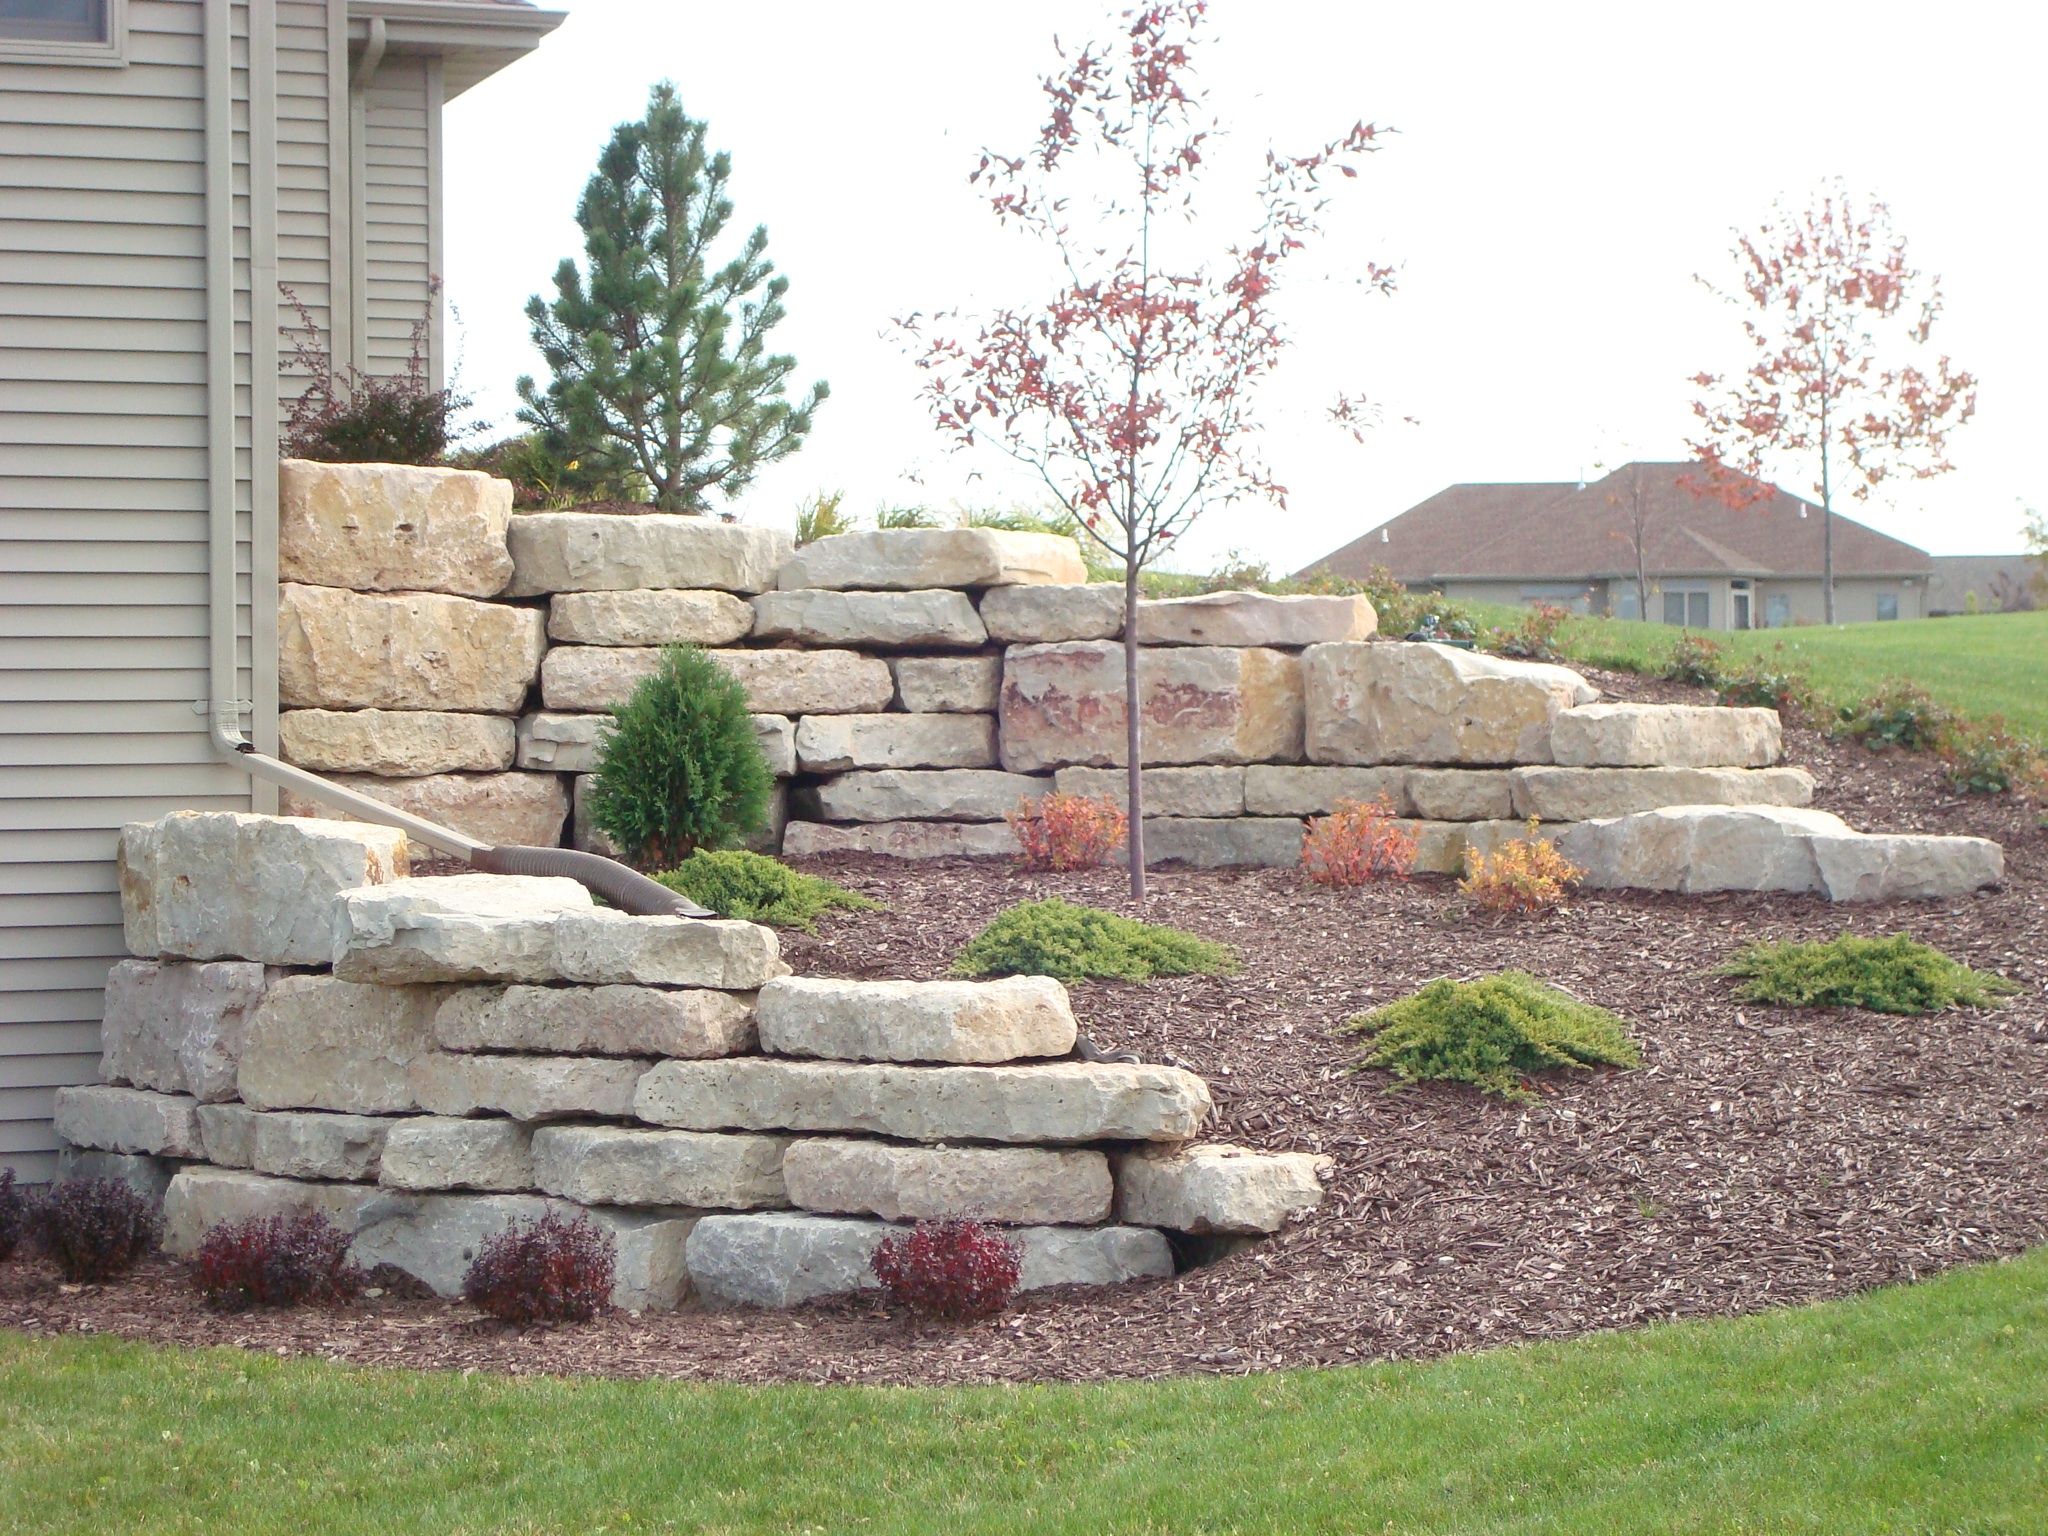 stone retaining walls in landscaping along hill next to house